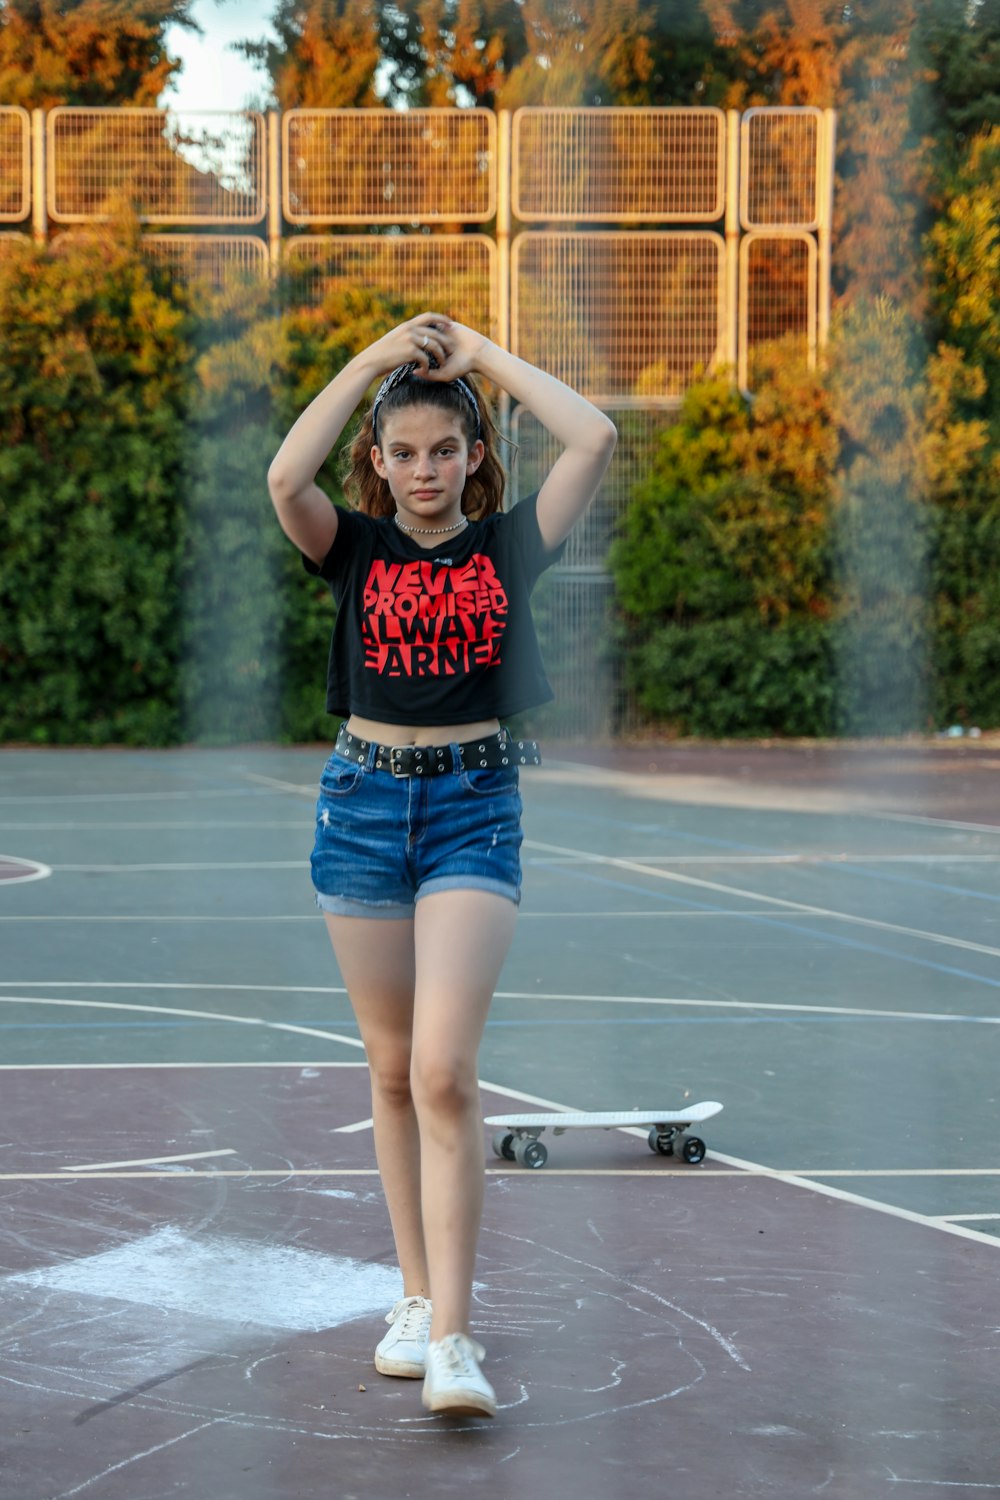 woman in red tank top and blue denim shorts standing on basketball court